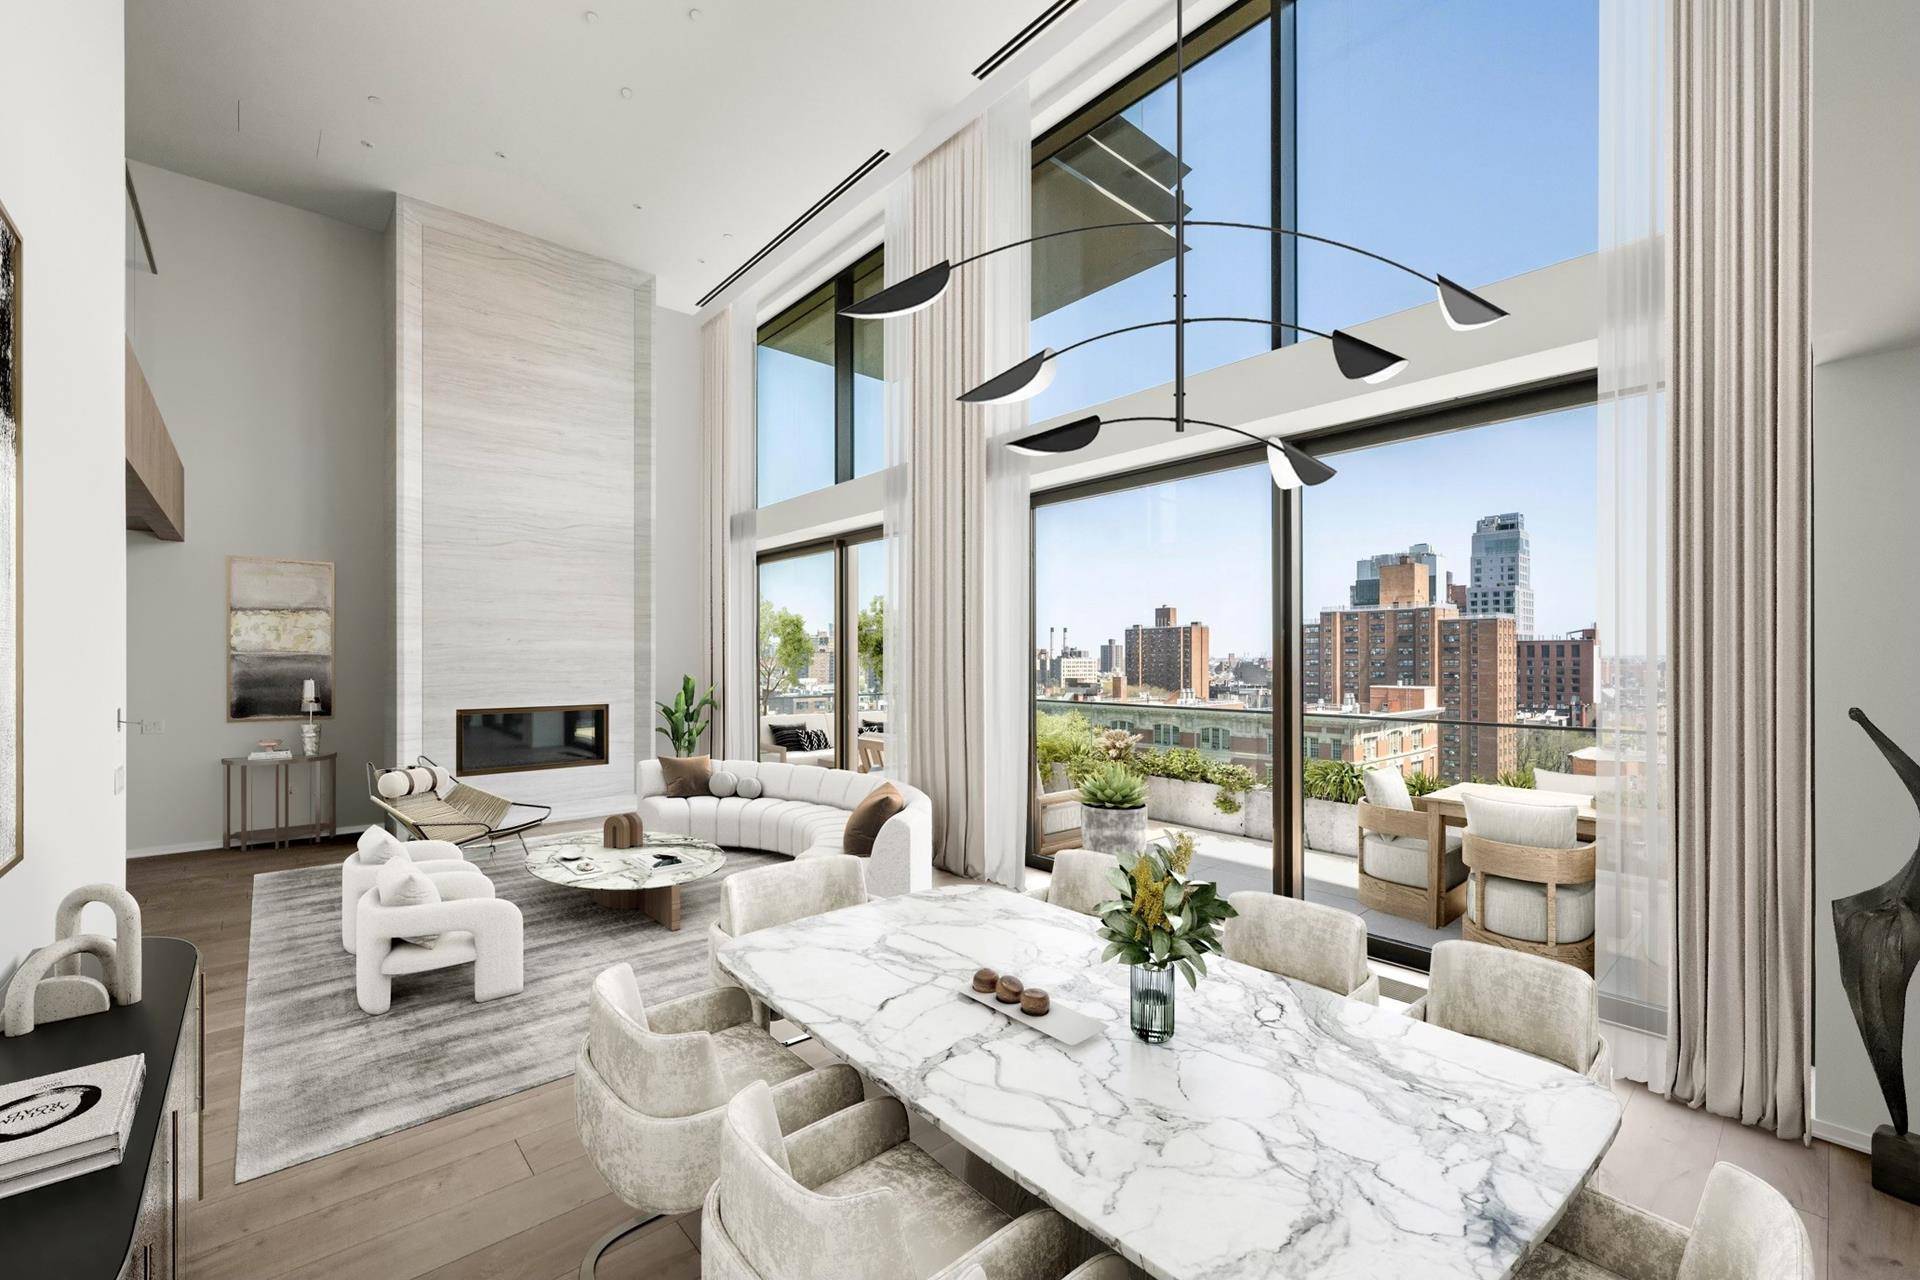 Immediate Occupancy ! Designed by world renowned architect, Thomas Juul Hansen, 199 Chrystie Street presents 14 beautifully crafted interlocking villas that evokes striking architectural design yet remains refined through the ...